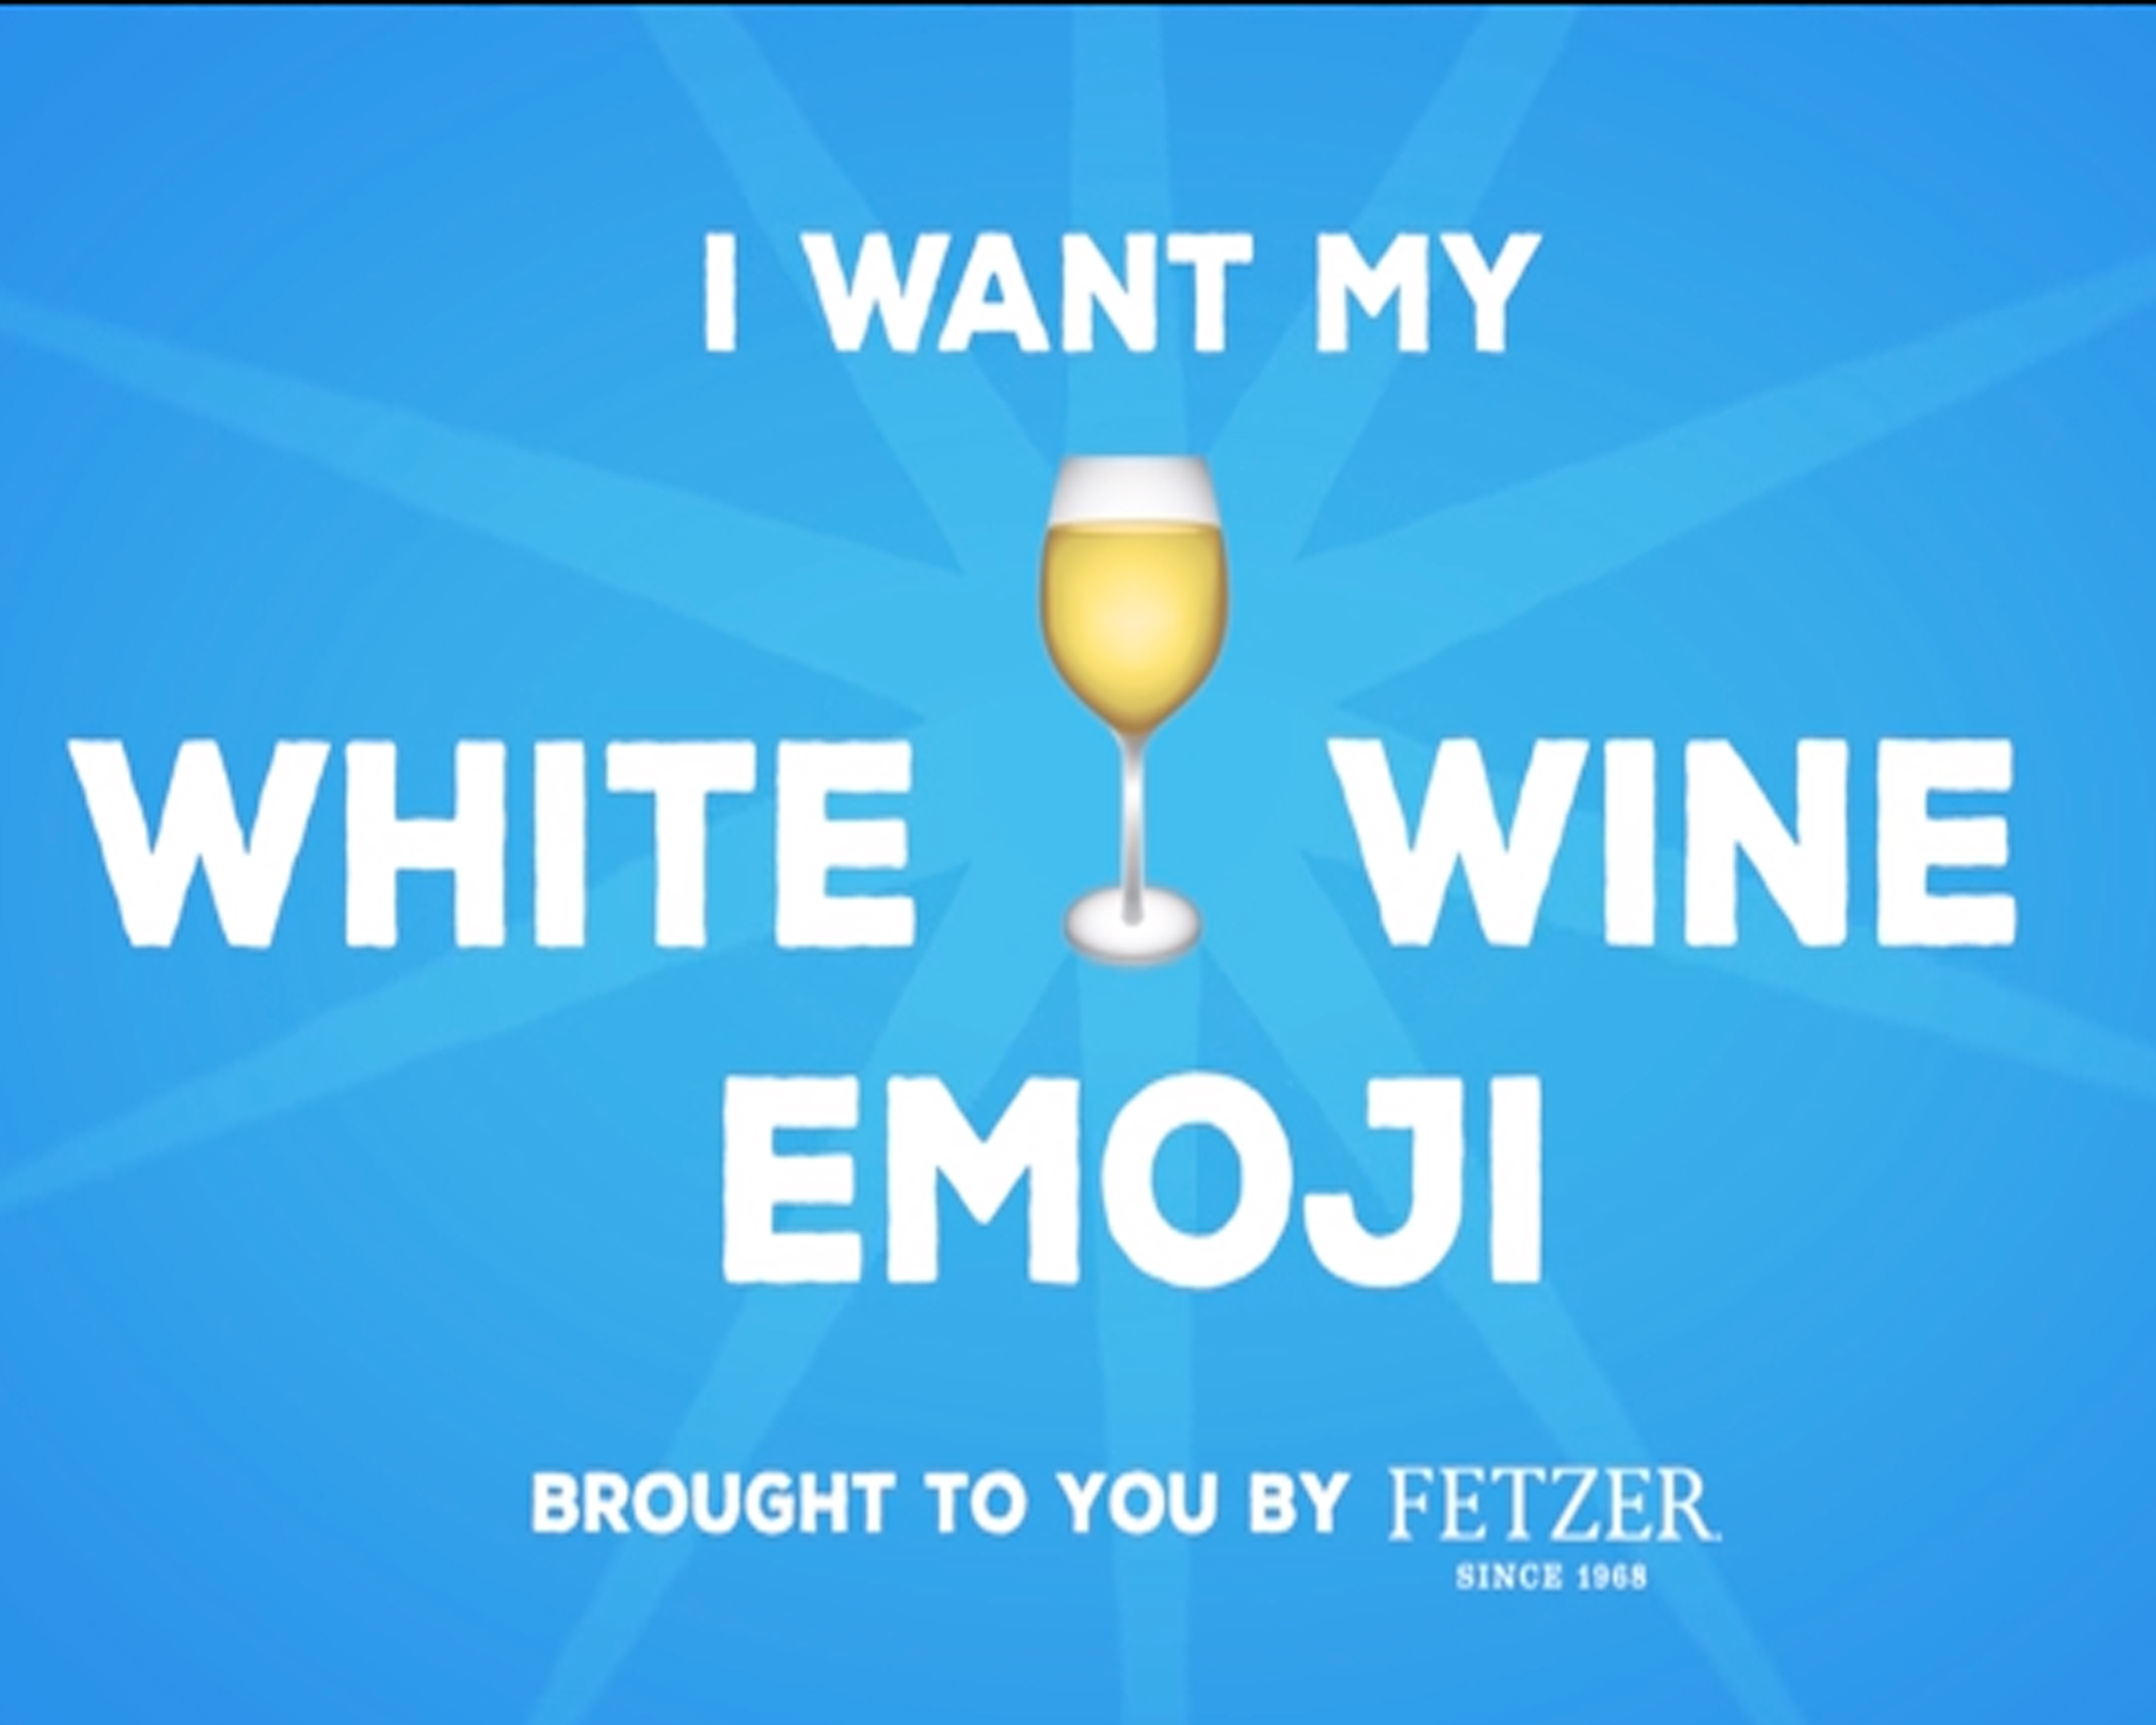 Fetzer’s engaging “I Want My White Wine Emoji” video is at the heart of the vintner’s efforts to generate awareness and enthusiasm for the #WhiteWineEmoji campaign. Already viewed more than 33,000 times on Facebook, the animated video highlights missed opportunities to pair a variety of items--from white wine-friendly foods like fish to day trips to sunny beaches--with the white wine emoji. View and share on Facebook